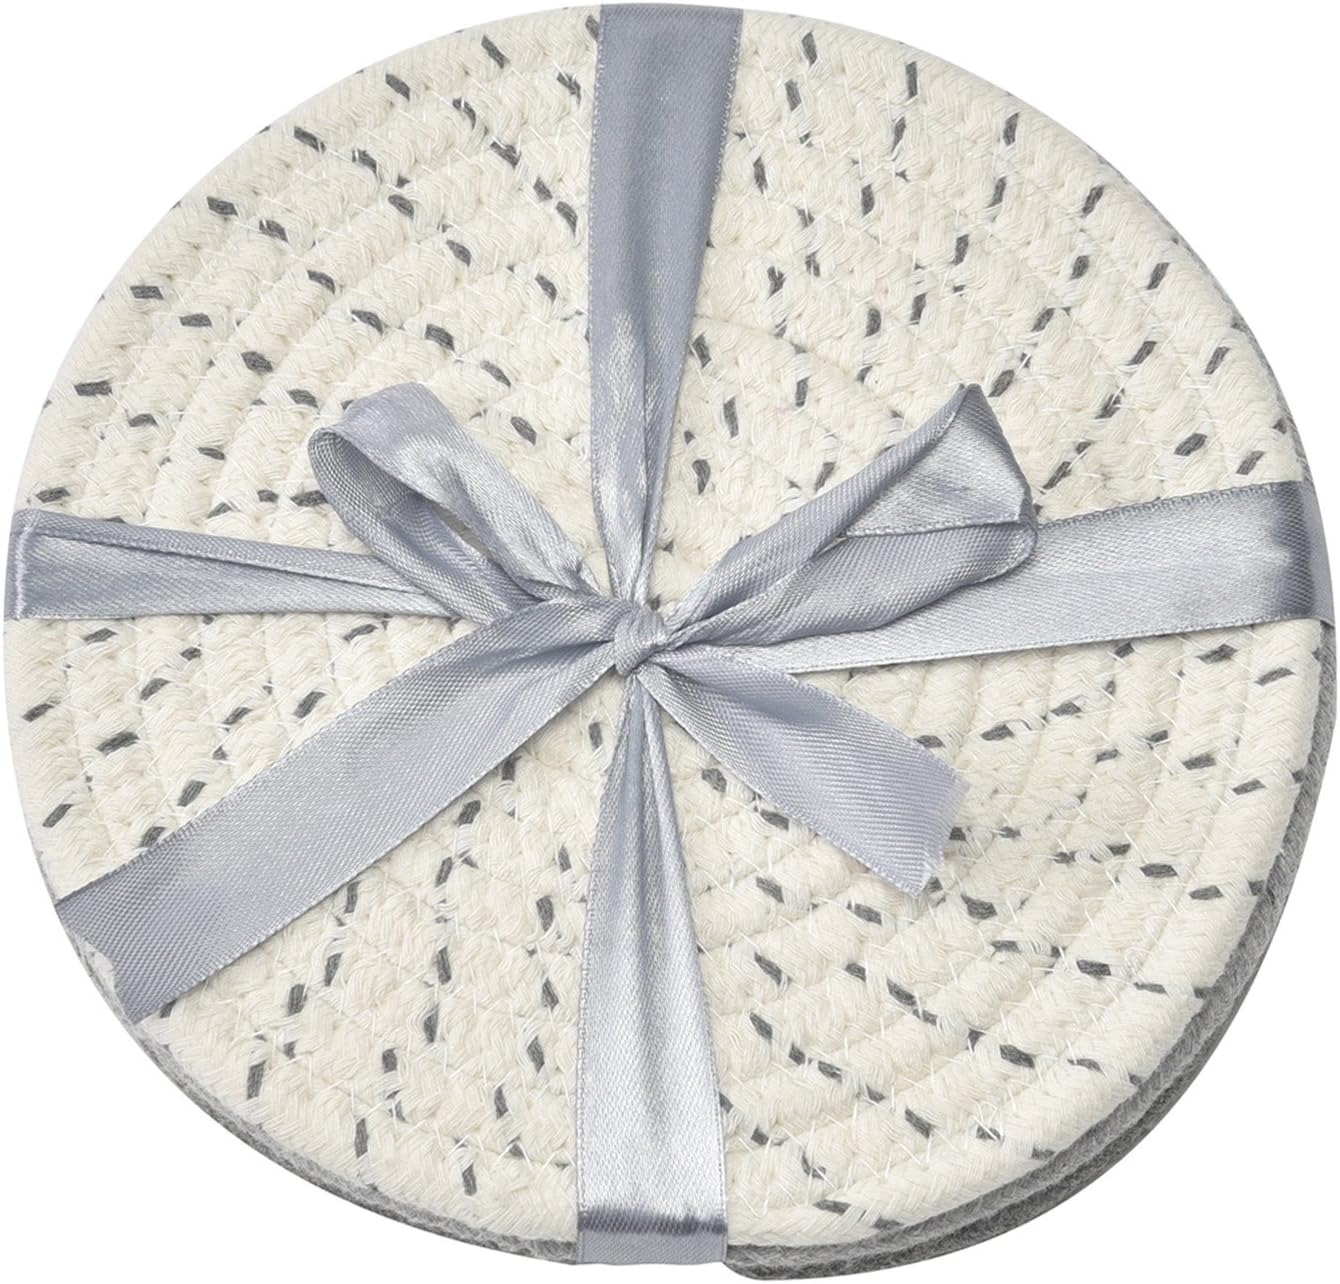 Potholders and Trivets Set: 100% Pure Cotton Thread Weave - Stylish Coasters, Hot Pads, and More (Set of 3) - Diameter 7 Inches, Gray